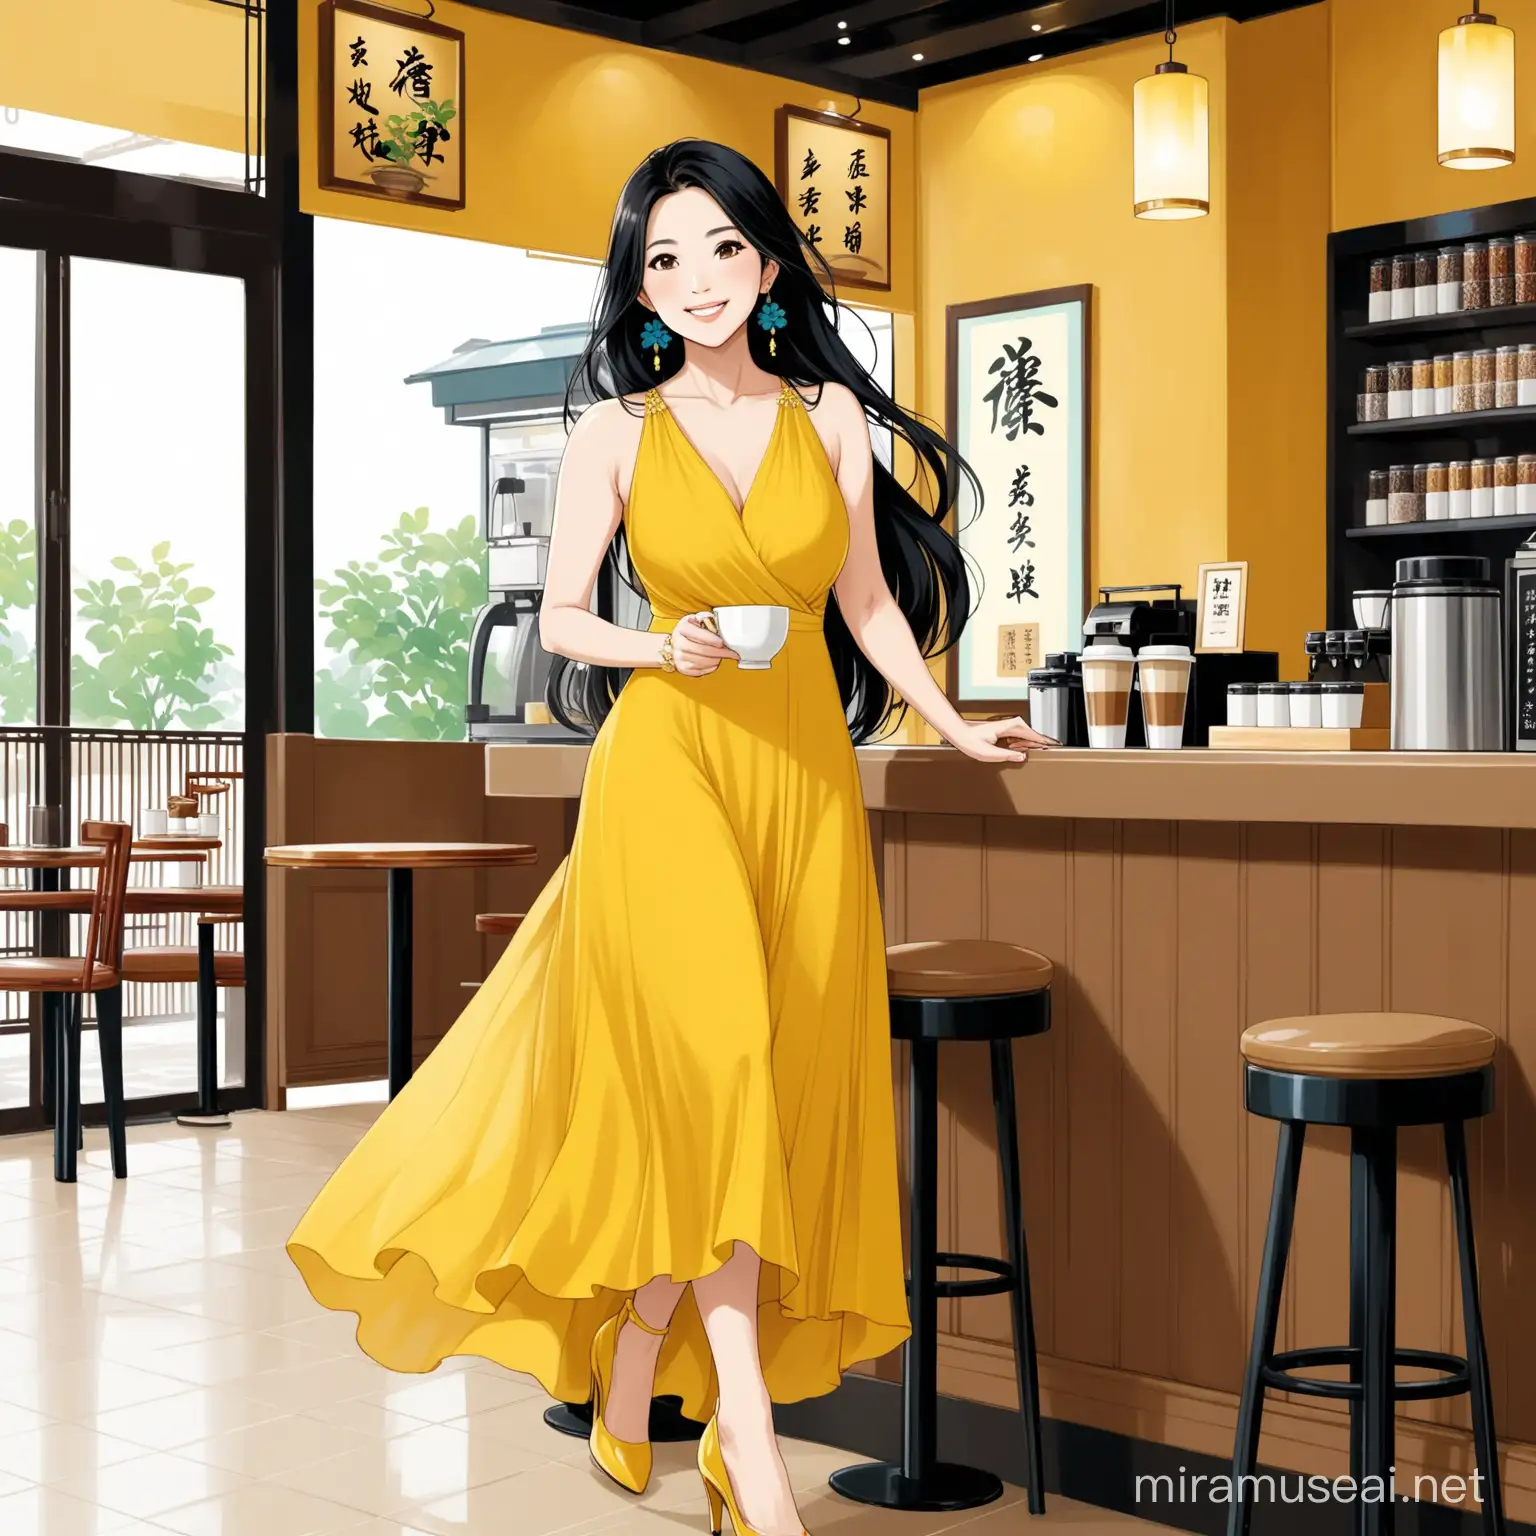 43 year old woman, long black hair flowy, brown eyes, smiling, long yellow dress with blue flowers, dangly emerald earrings, Chinese Asian, beige high heels, smiling, coffee shop, 